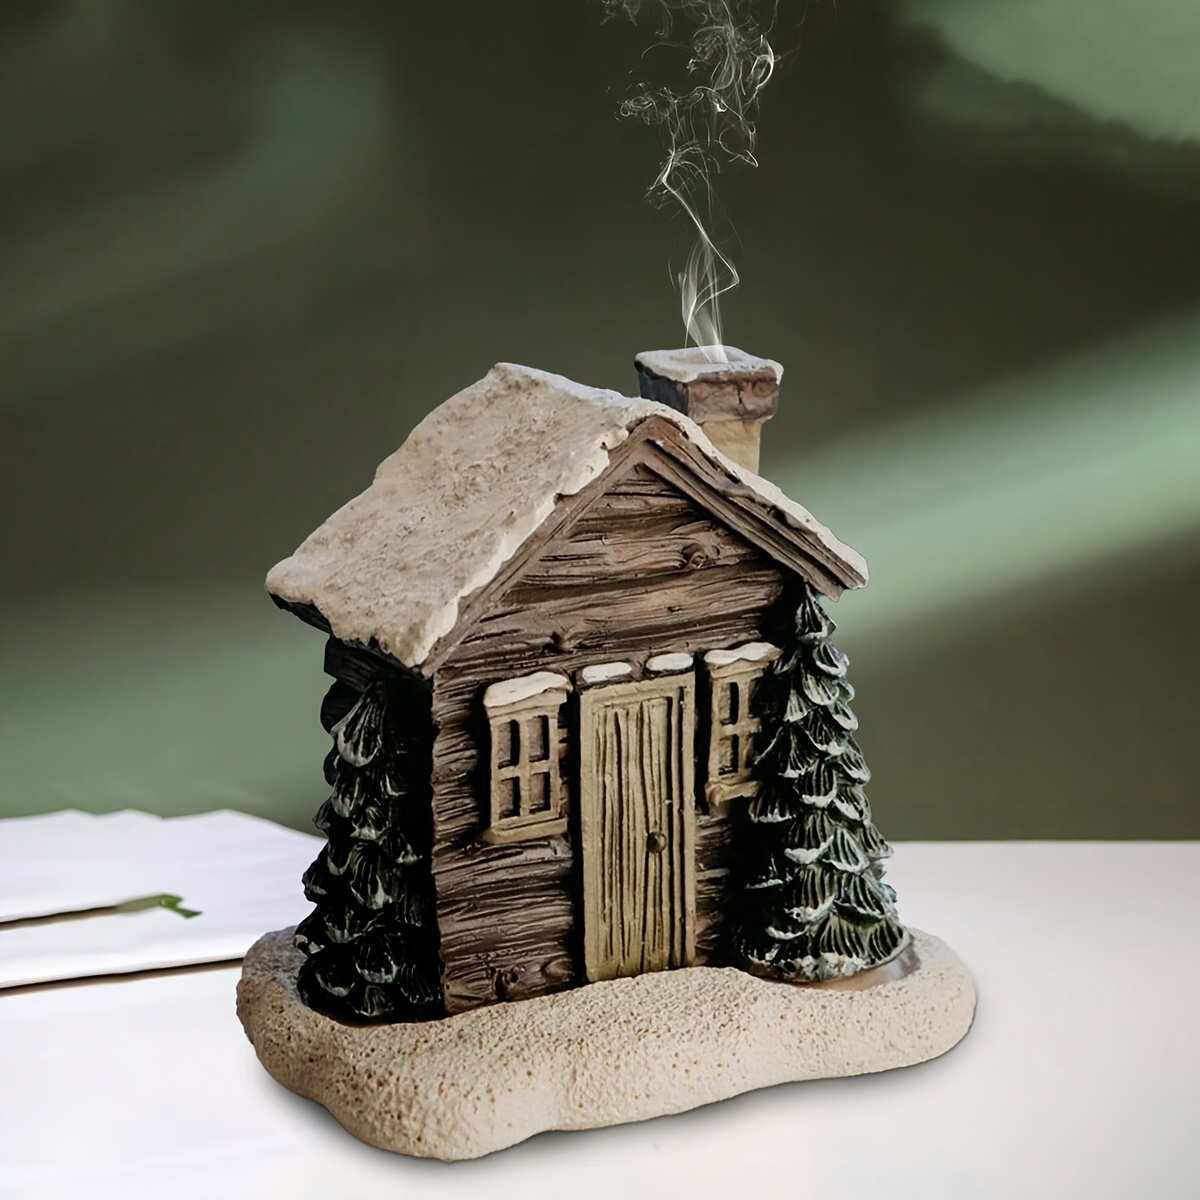 

1pc Rustic Wooden House Incense Burner, Resin Crafted With Detachable Base, Festive Christmas Decor, 3d Holiday Wall Decor, Farmhouse Style, Home & Outdoor Decoration